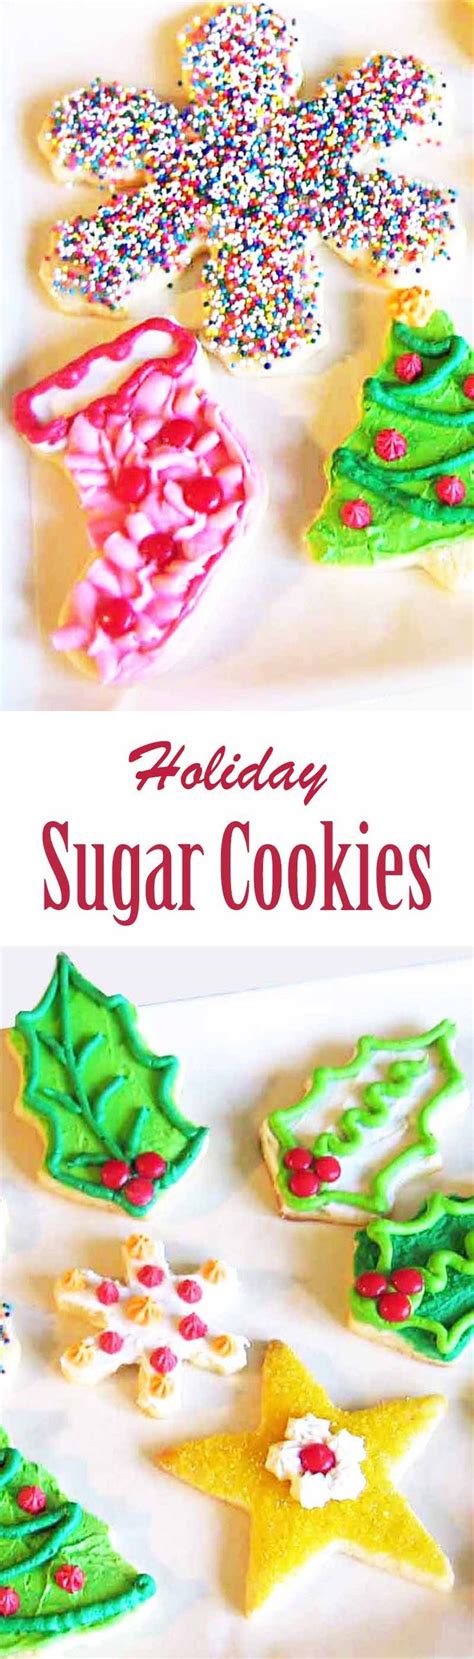 Spitzbuben is a very old german word that actually means crooks. Holiday Sugar Cookies | Recipe (With images) | Holiday sugar cookies, Sugar cookies, Sugar cookie